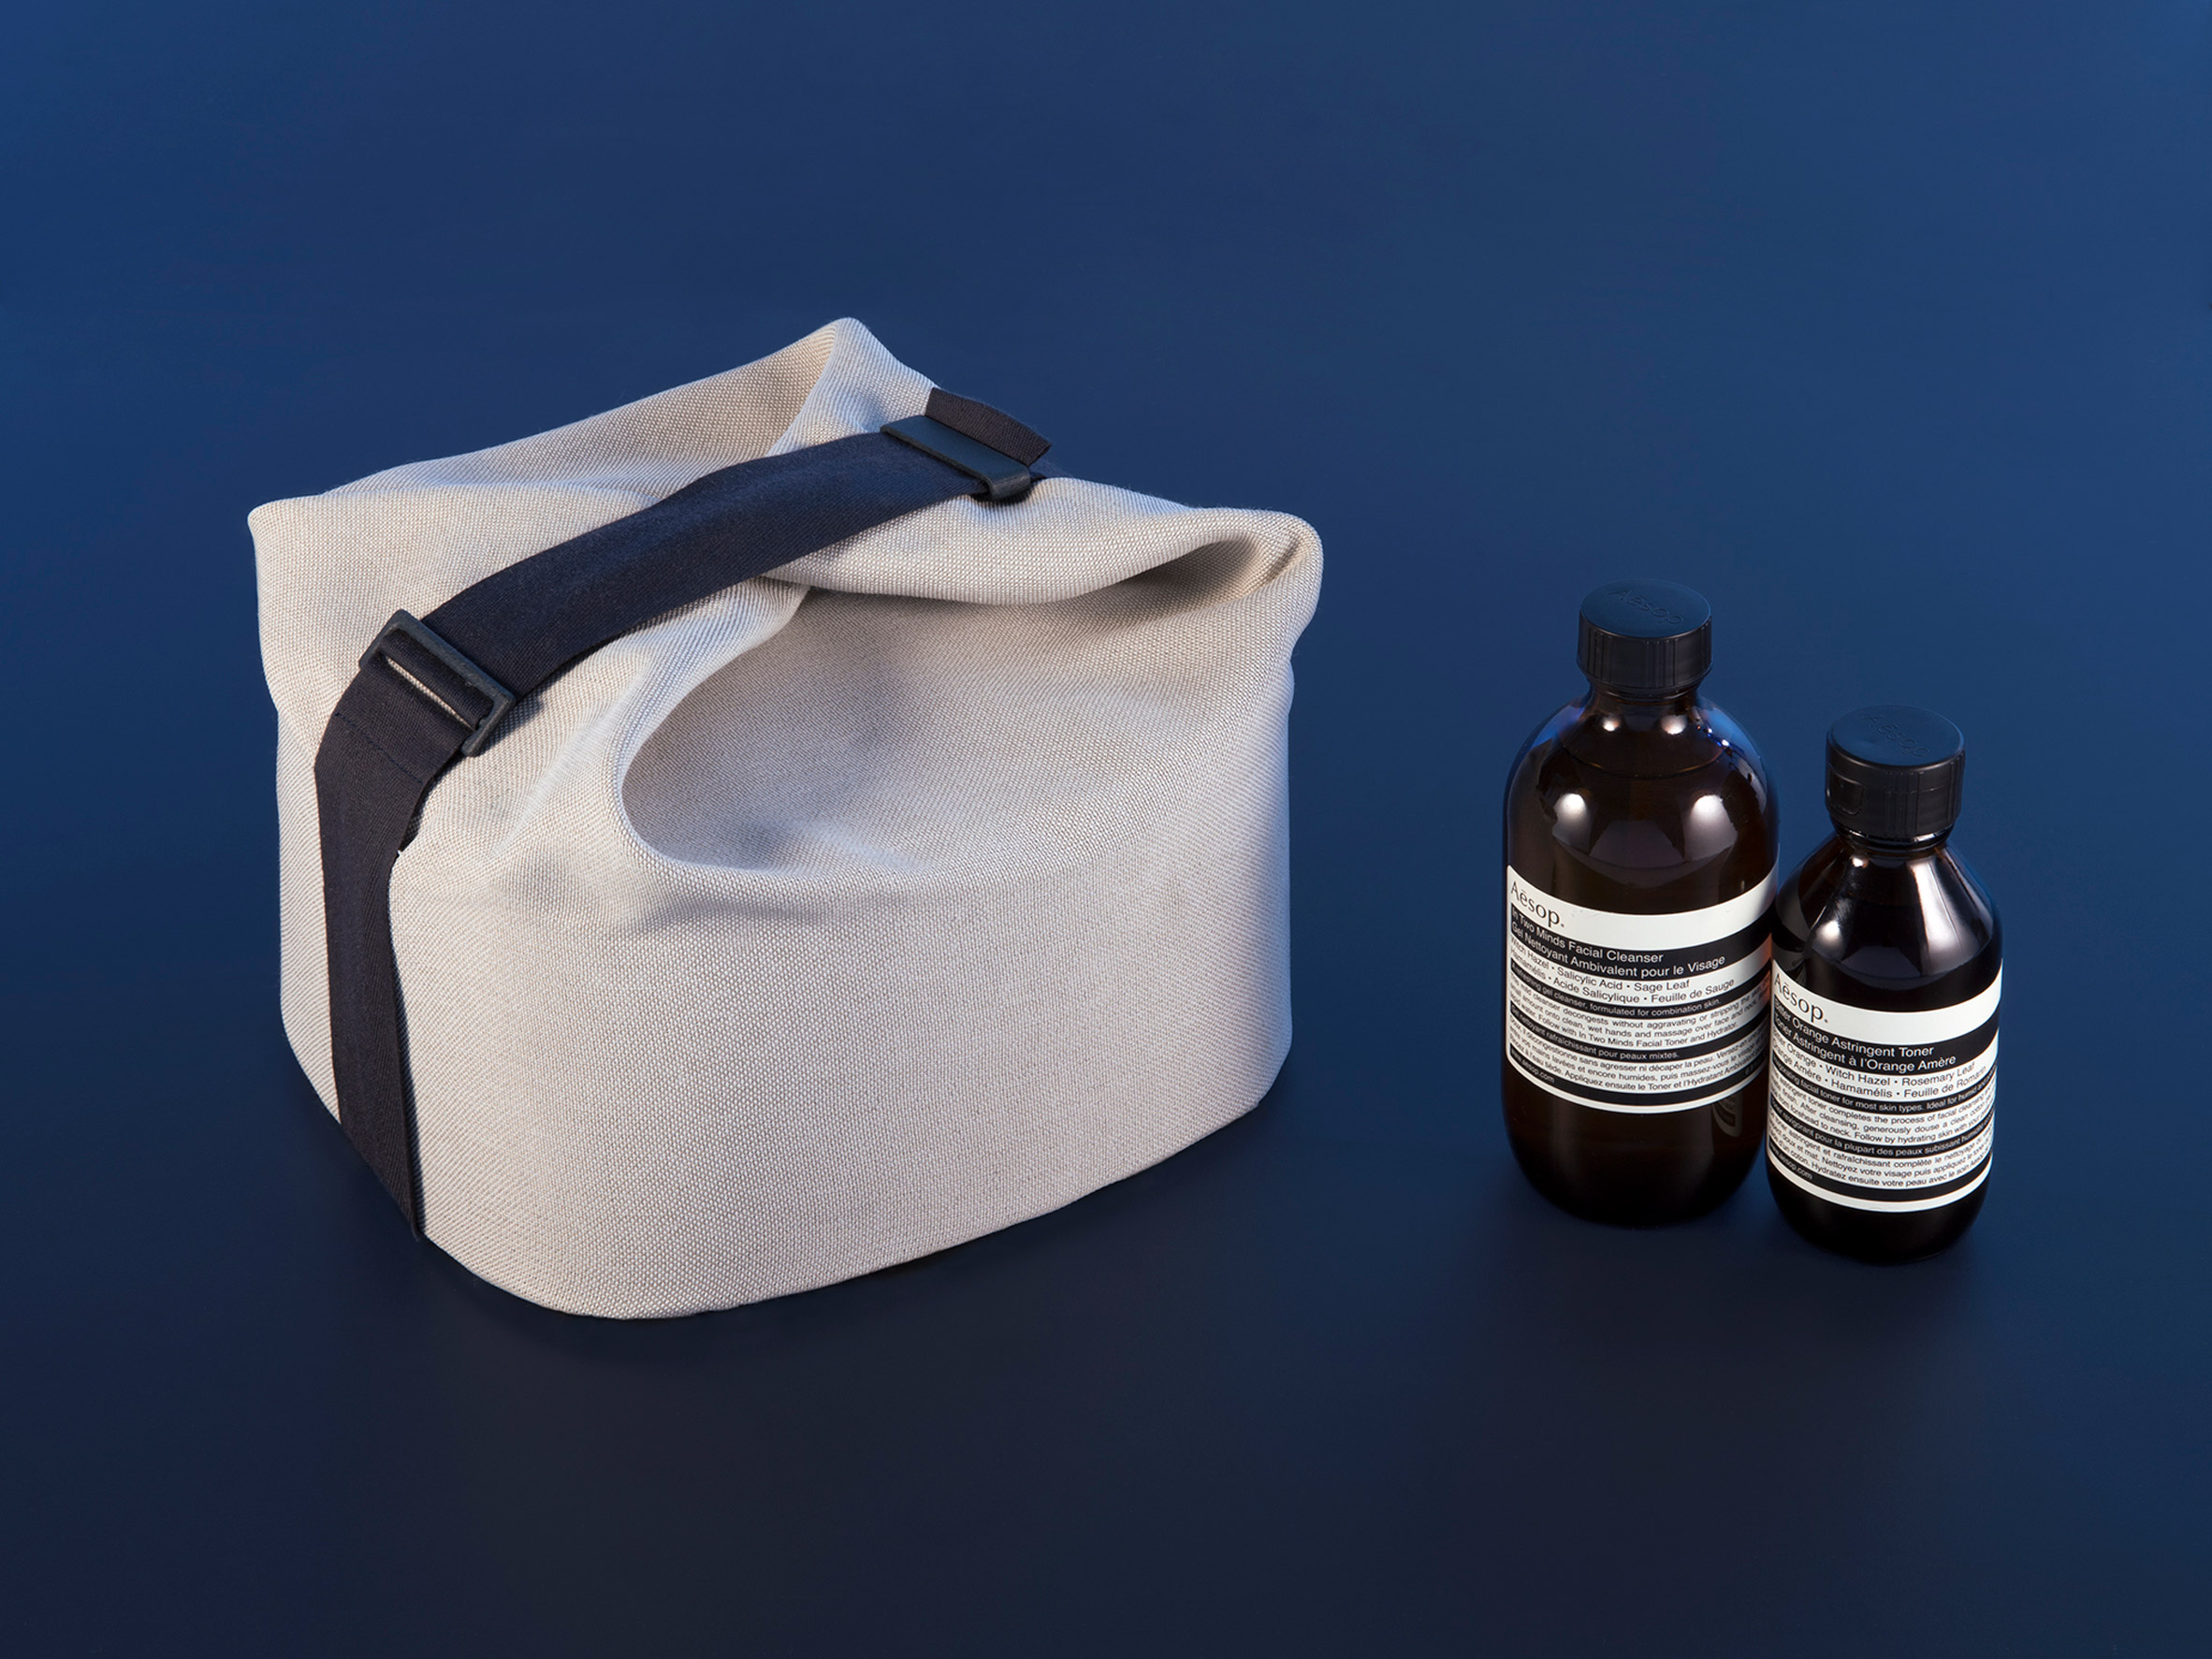 ÉCAL students create imaginative oil diffusers and wash bags for Aesop